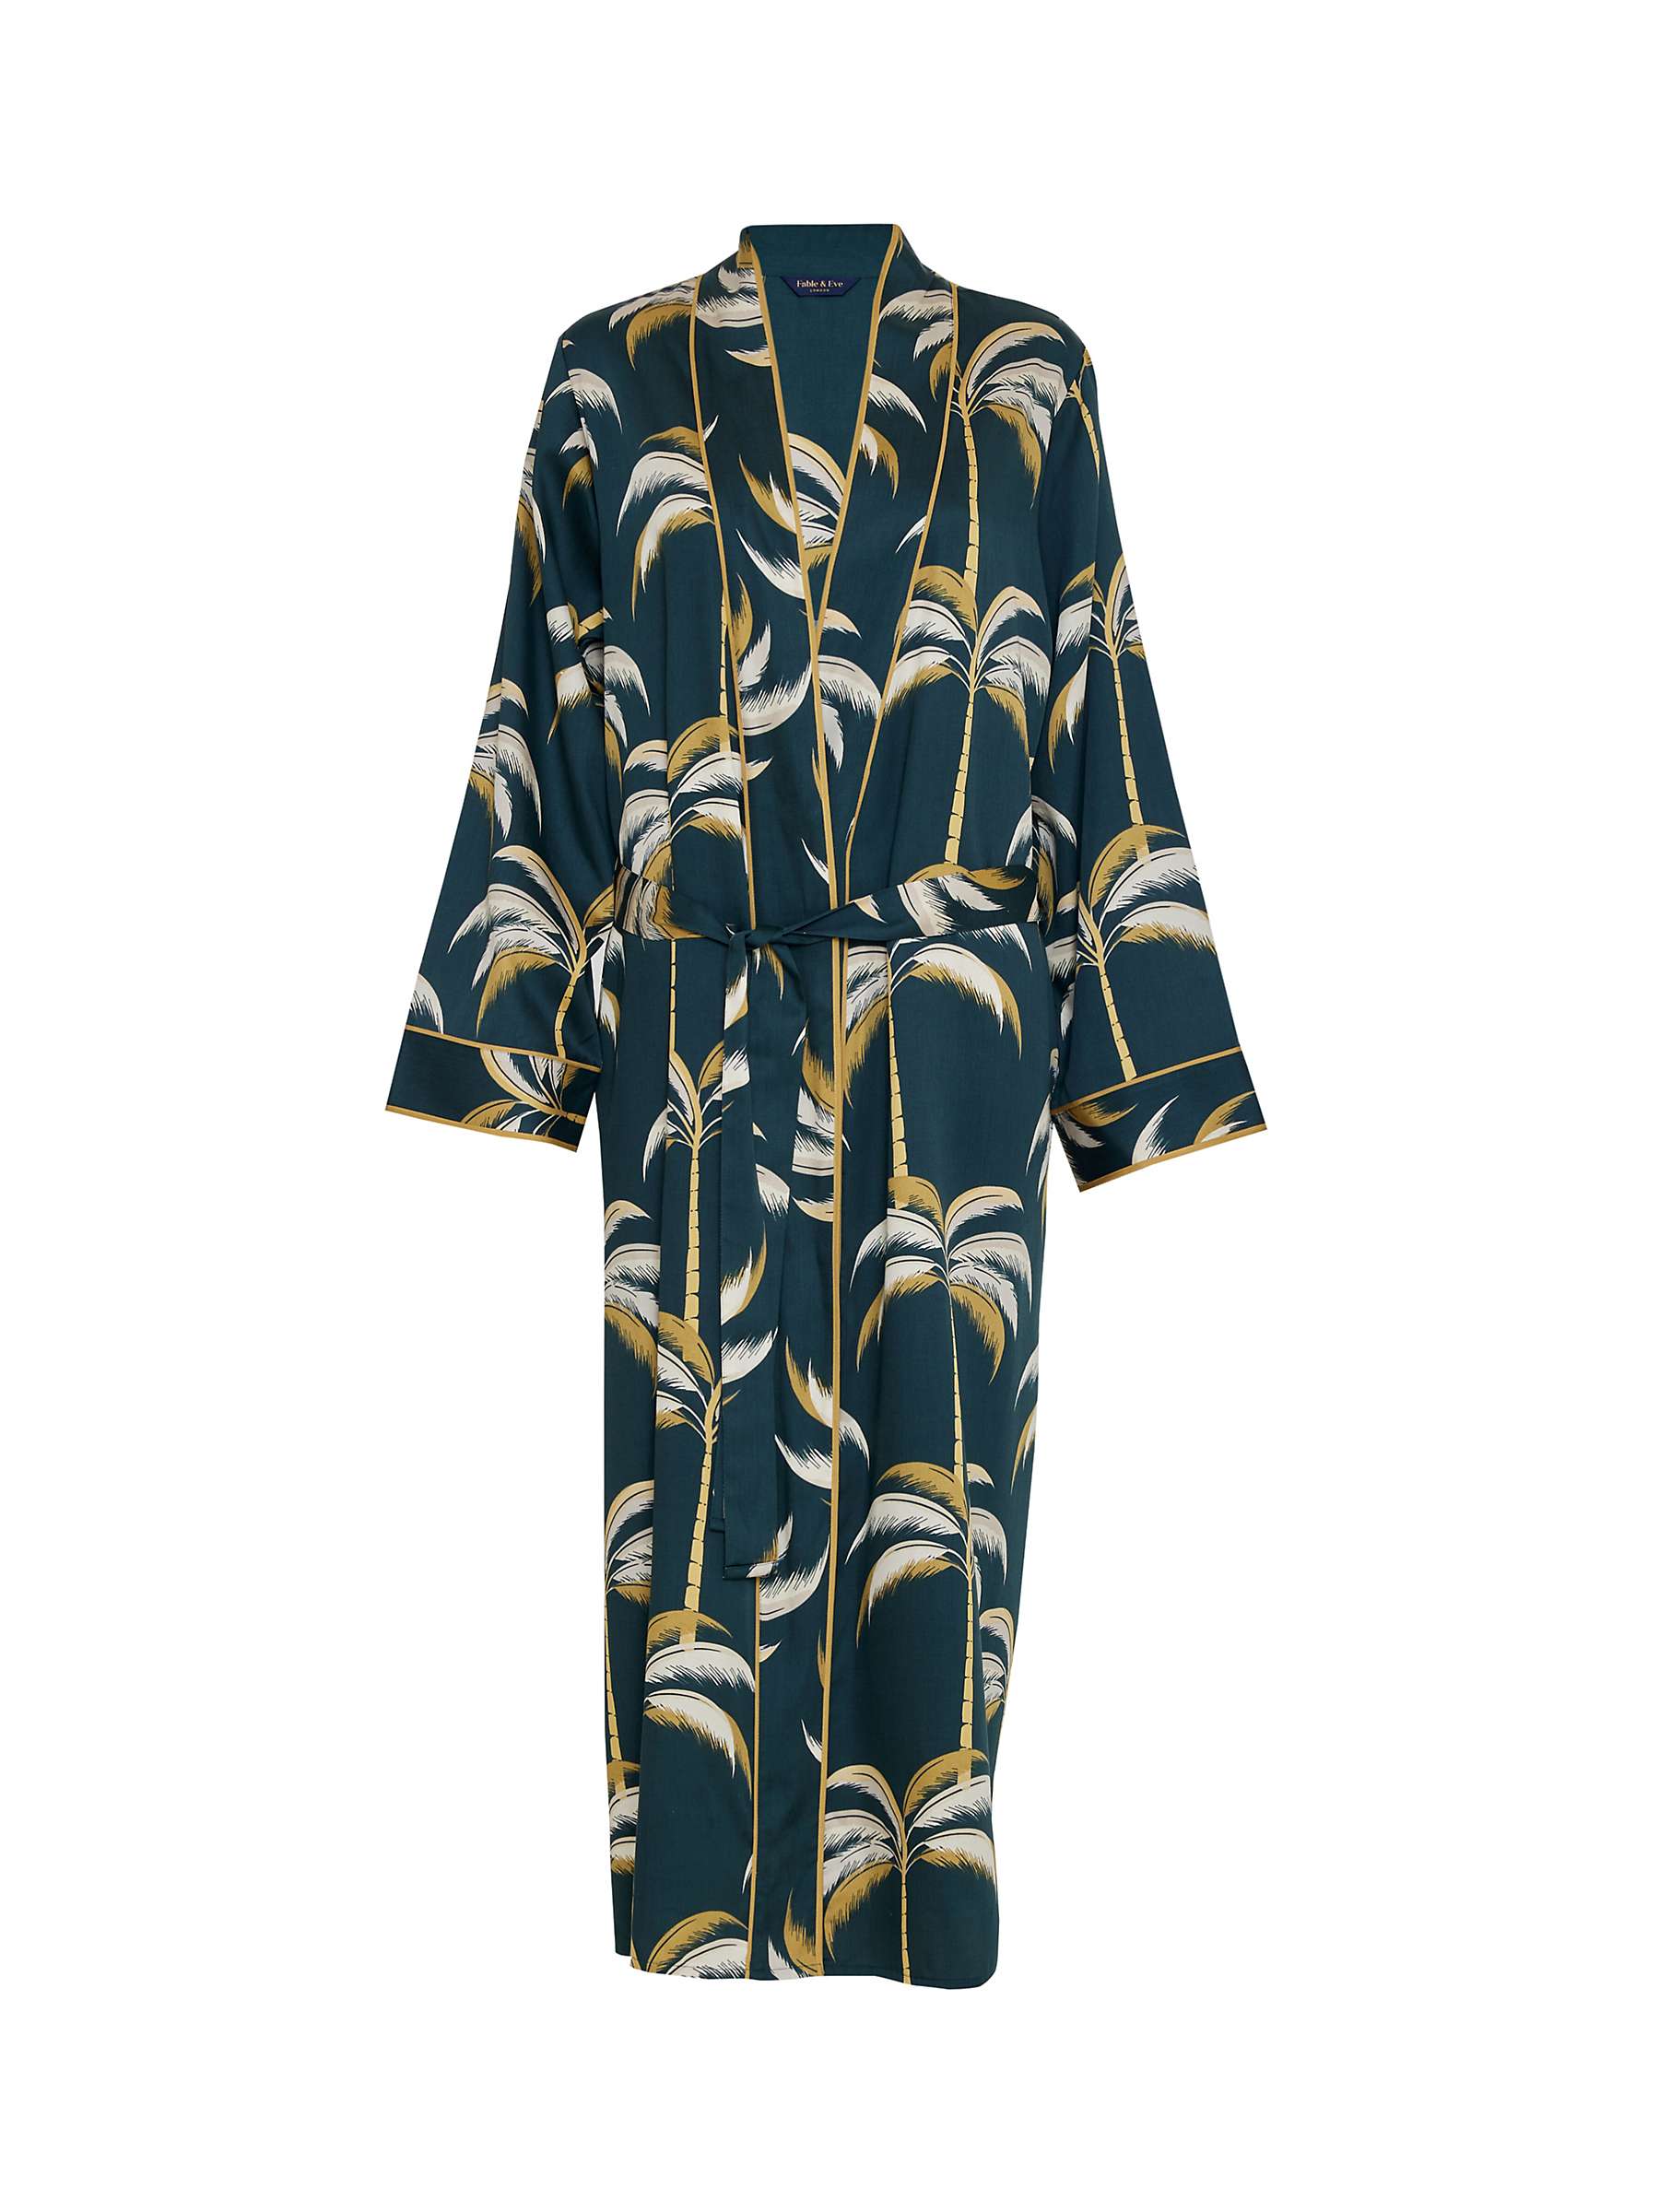 Buy Fable & Eve Pimlico Palm Print Dressing Gown, Emerald Green Online at johnlewis.com